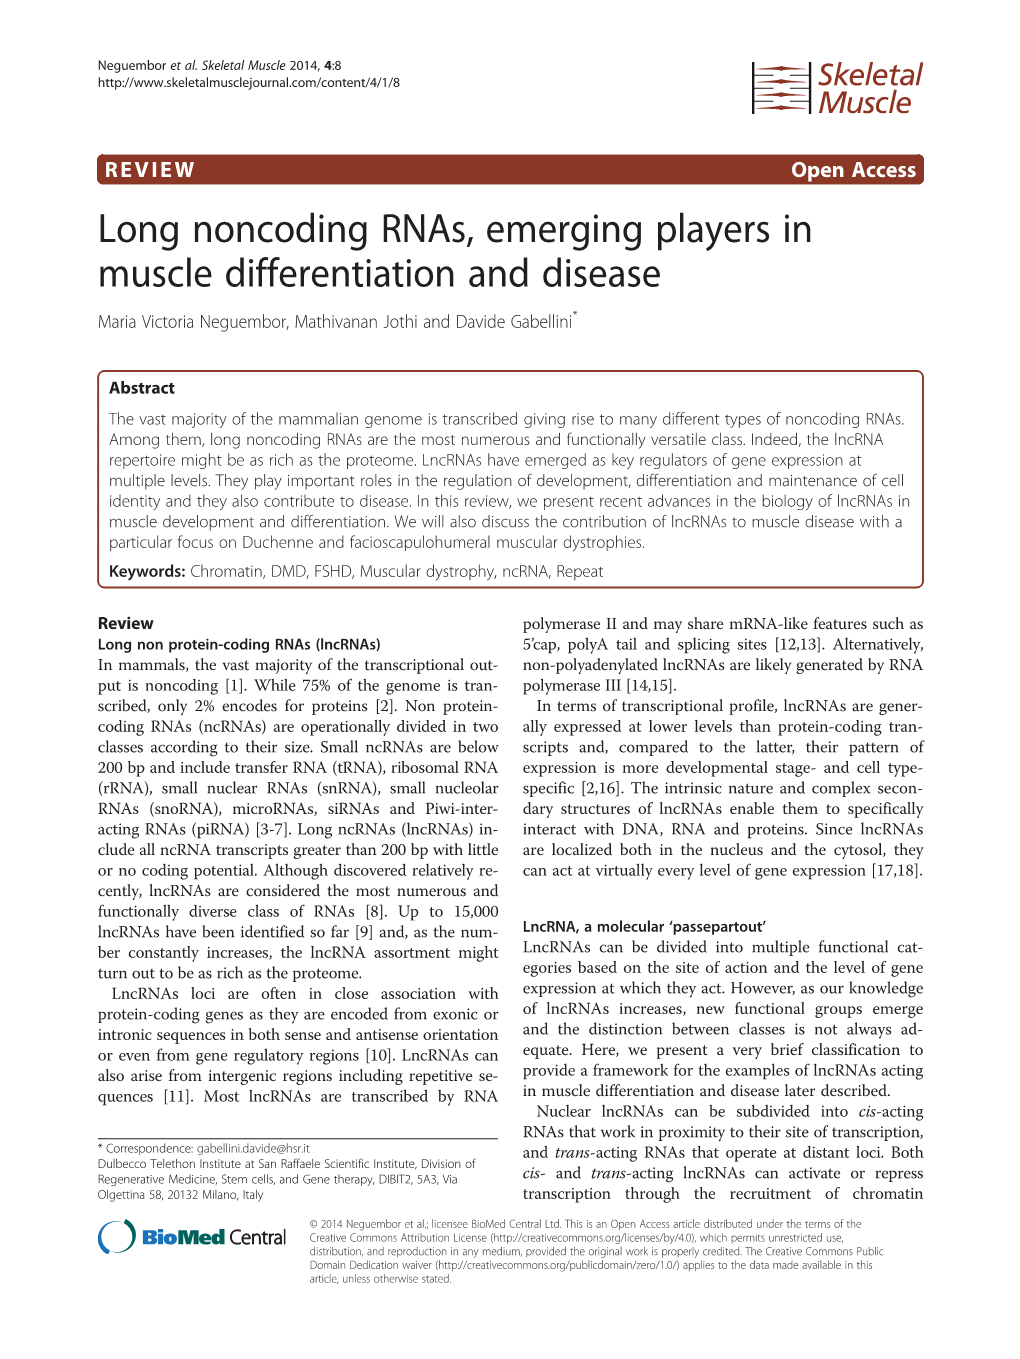 VIEW Open Access Long Noncoding Rnas, Emerging Players in Muscle Differentiation and Disease Maria Victoria Neguembor, Mathivanan Jothi and Davide Gabellini*